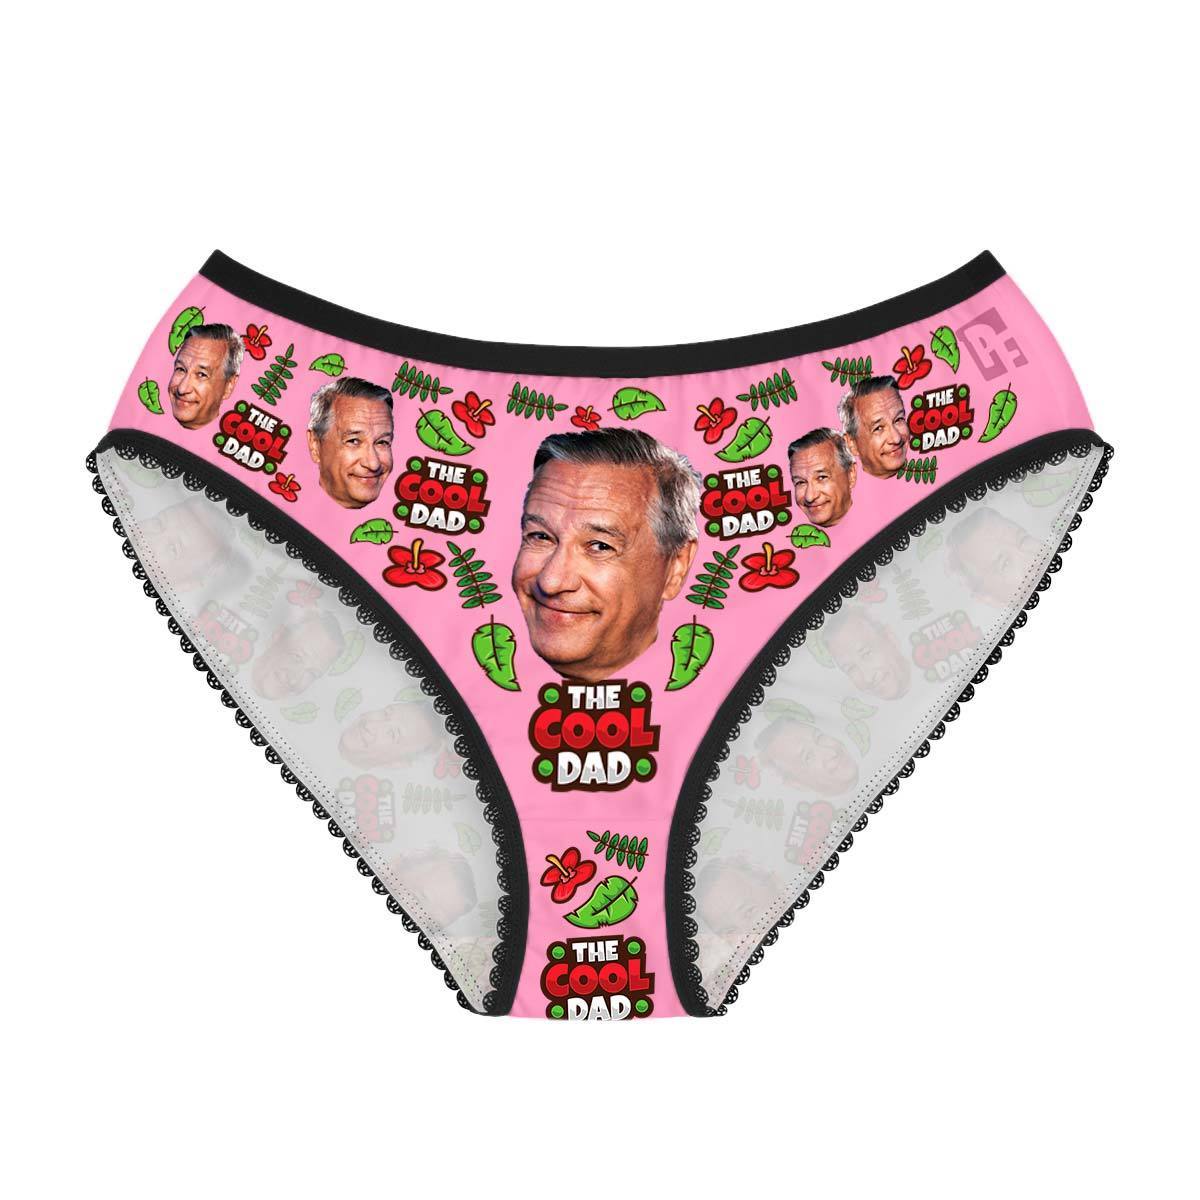 Pink The cool dad women's underwear briefs personalized with photo printed on them